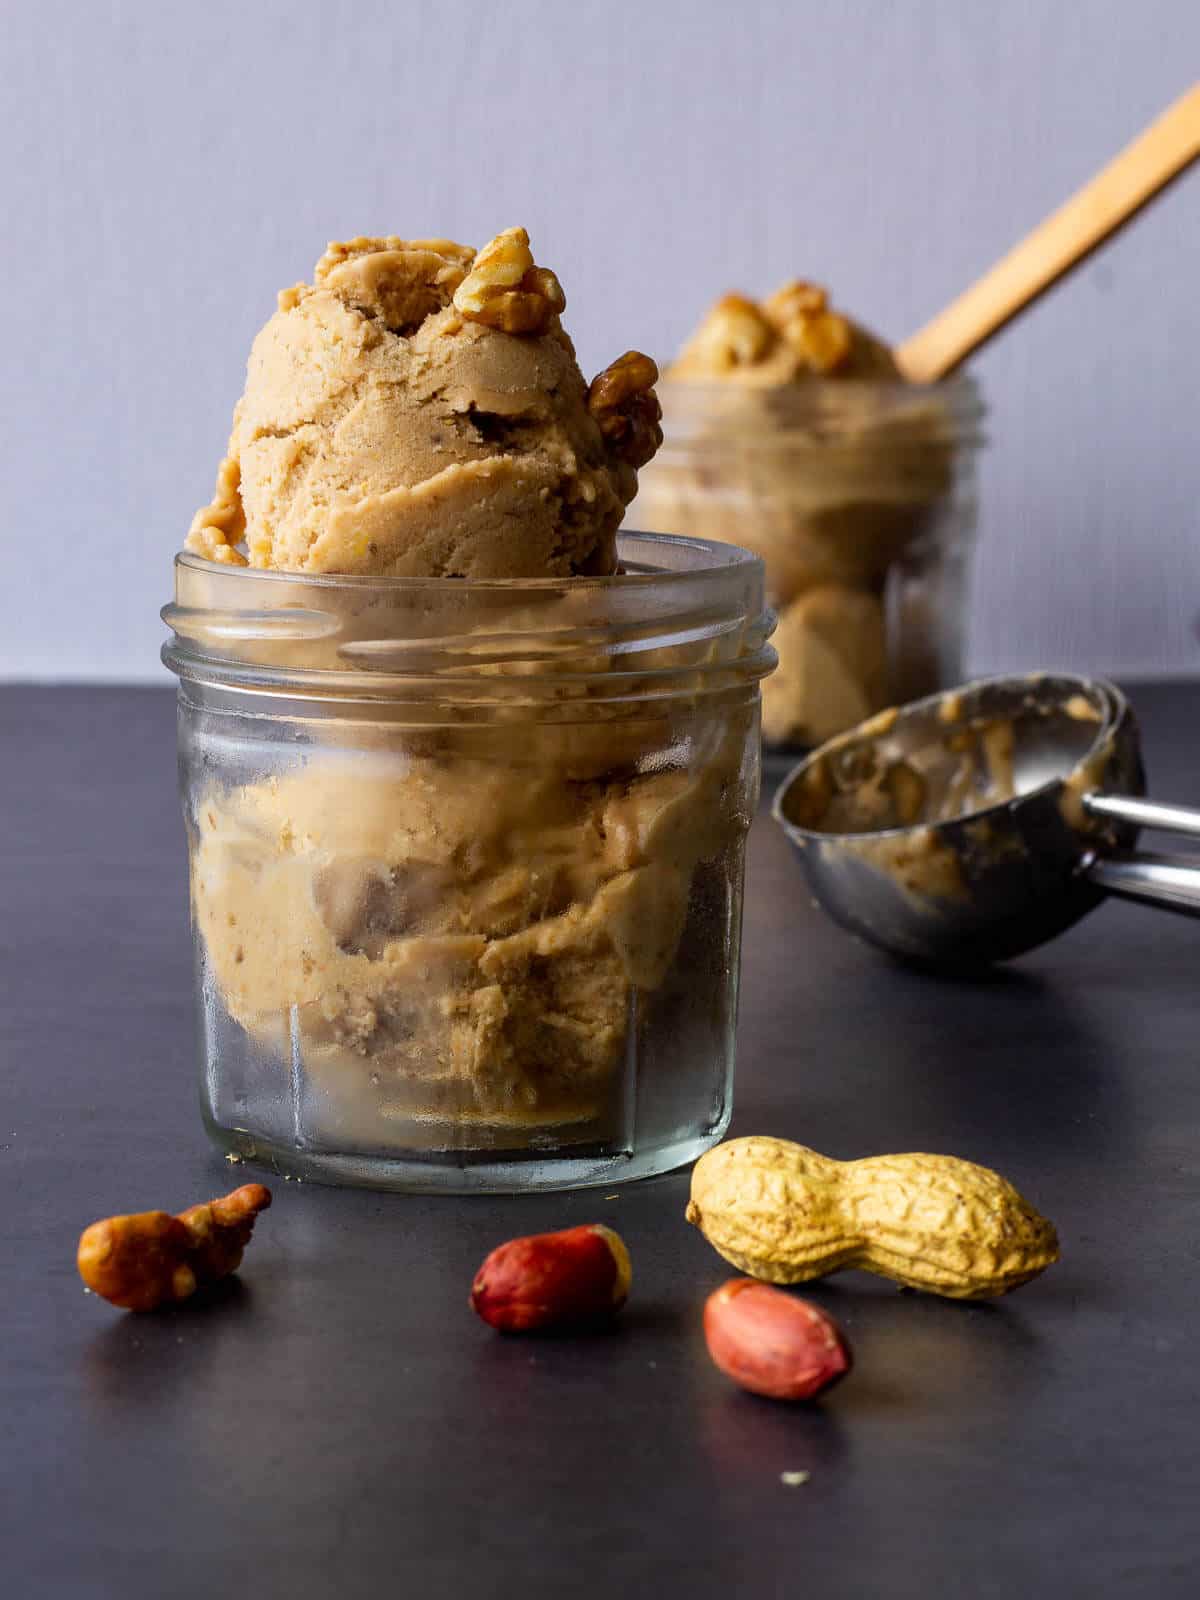 Peanut Butter Banana Ice cream served in a small glass.